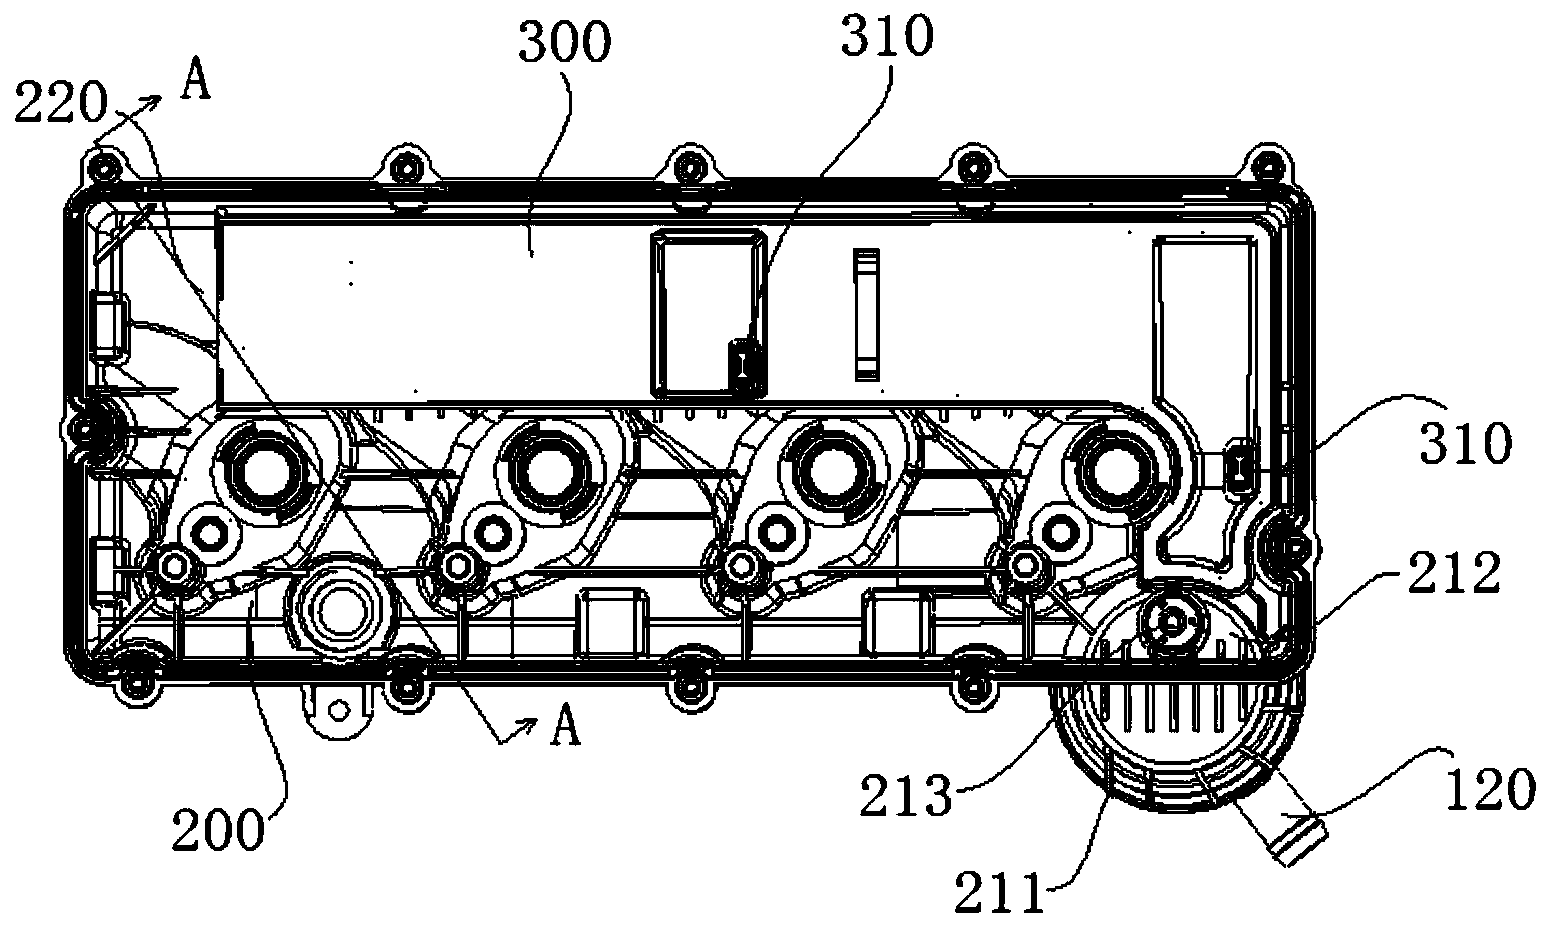 Engine cylinder cover shield and crankcase ventilation system